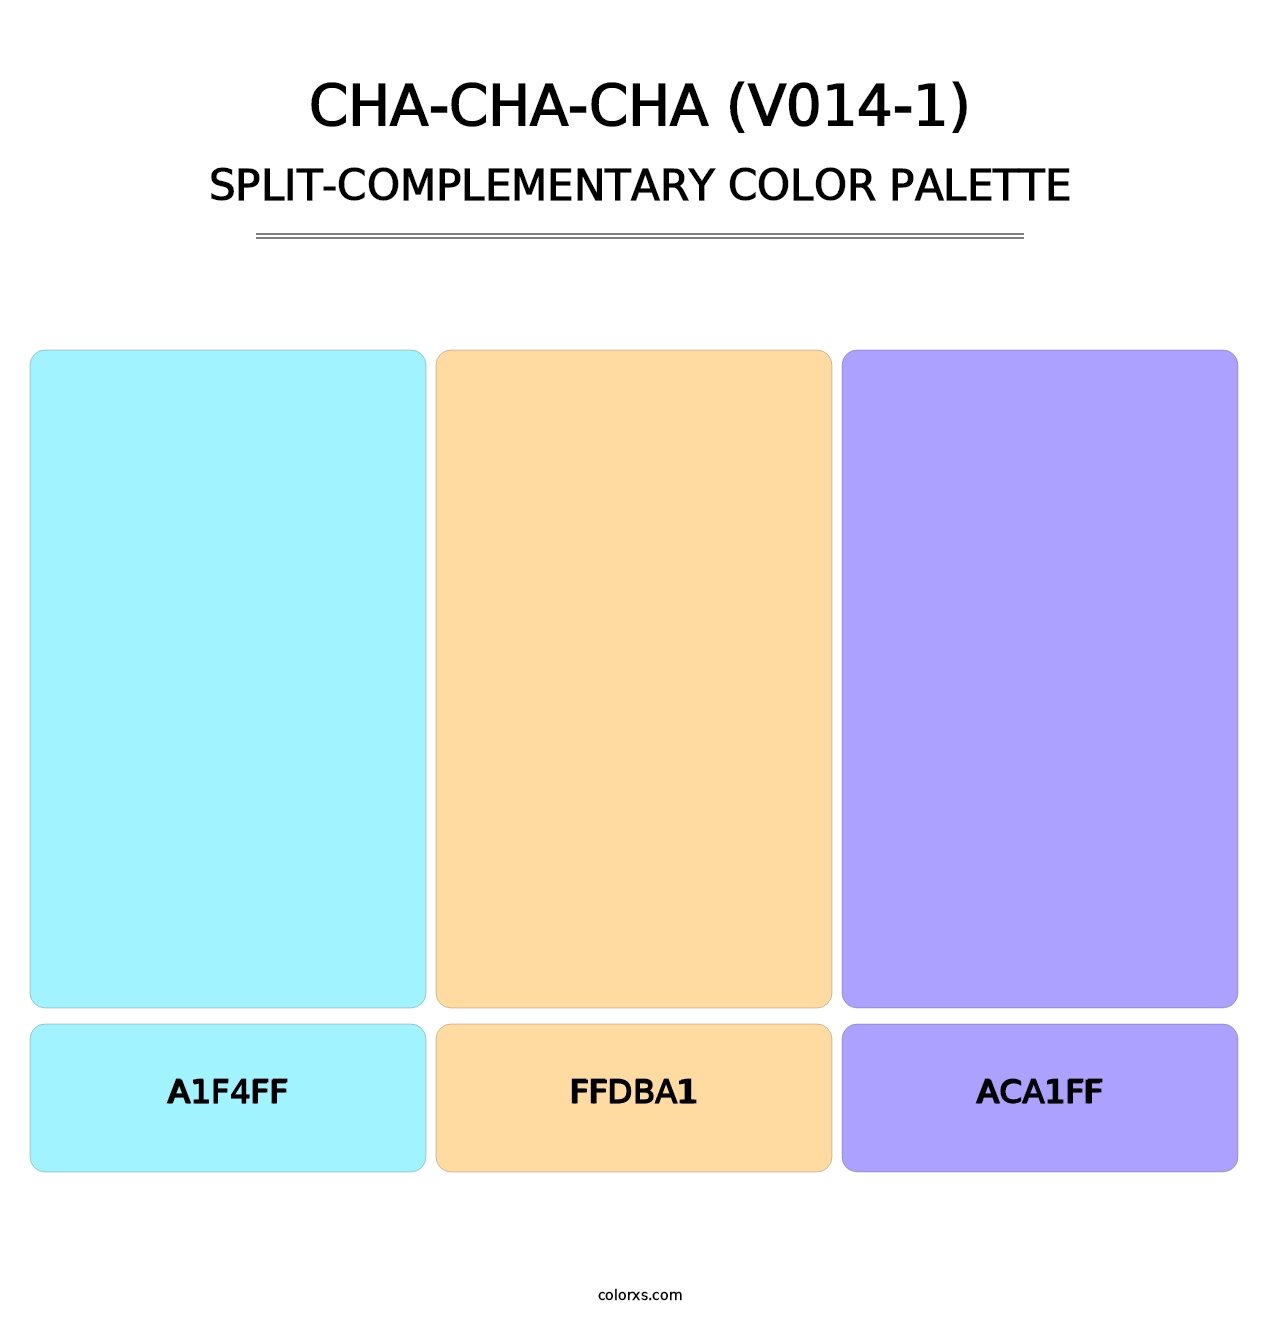 Cha-Cha-Cha (V014-1) - Split-Complementary Color Palette